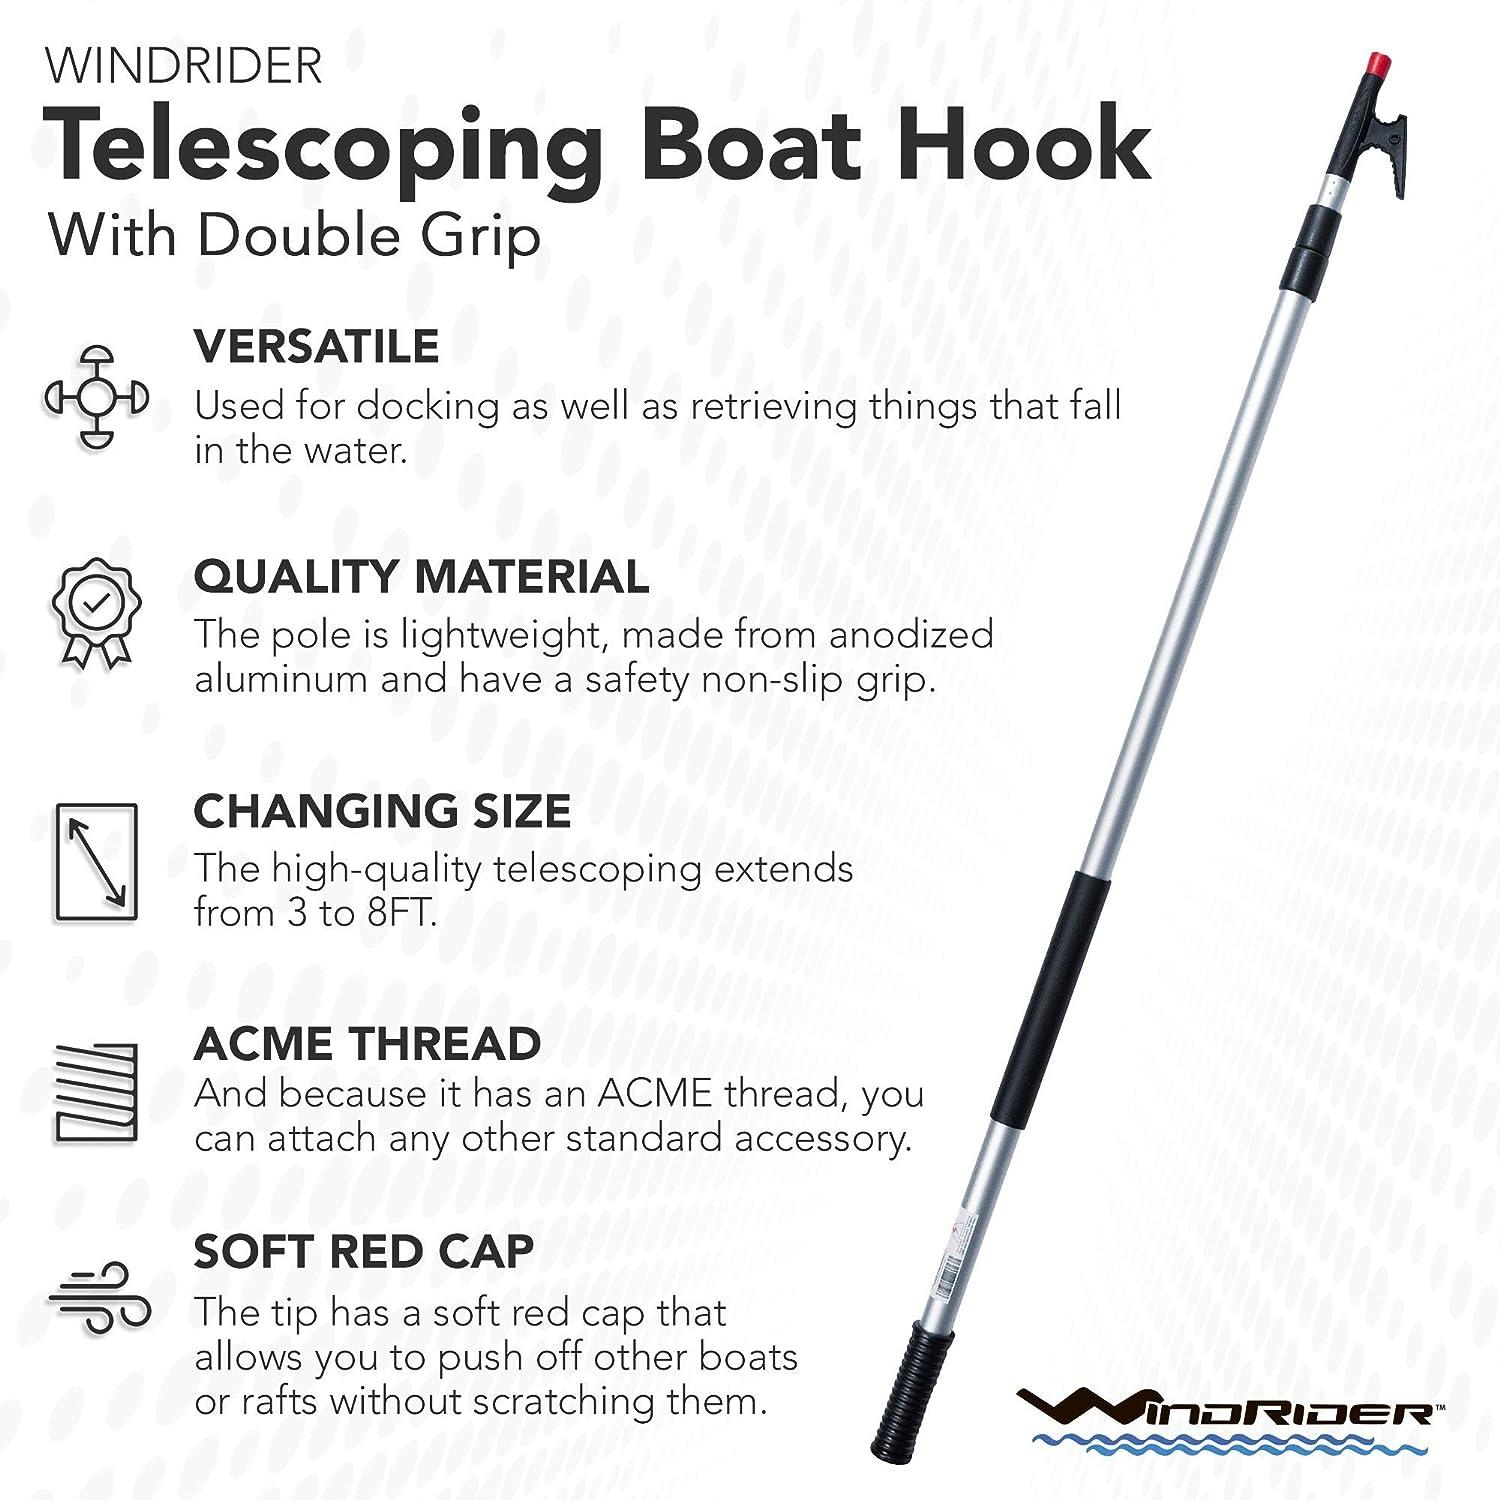 WindRider Telescoping Boat Hook, Floating, Double Grip, Super Strong Hook, Threaded End for Accessories, 8 or 12ft